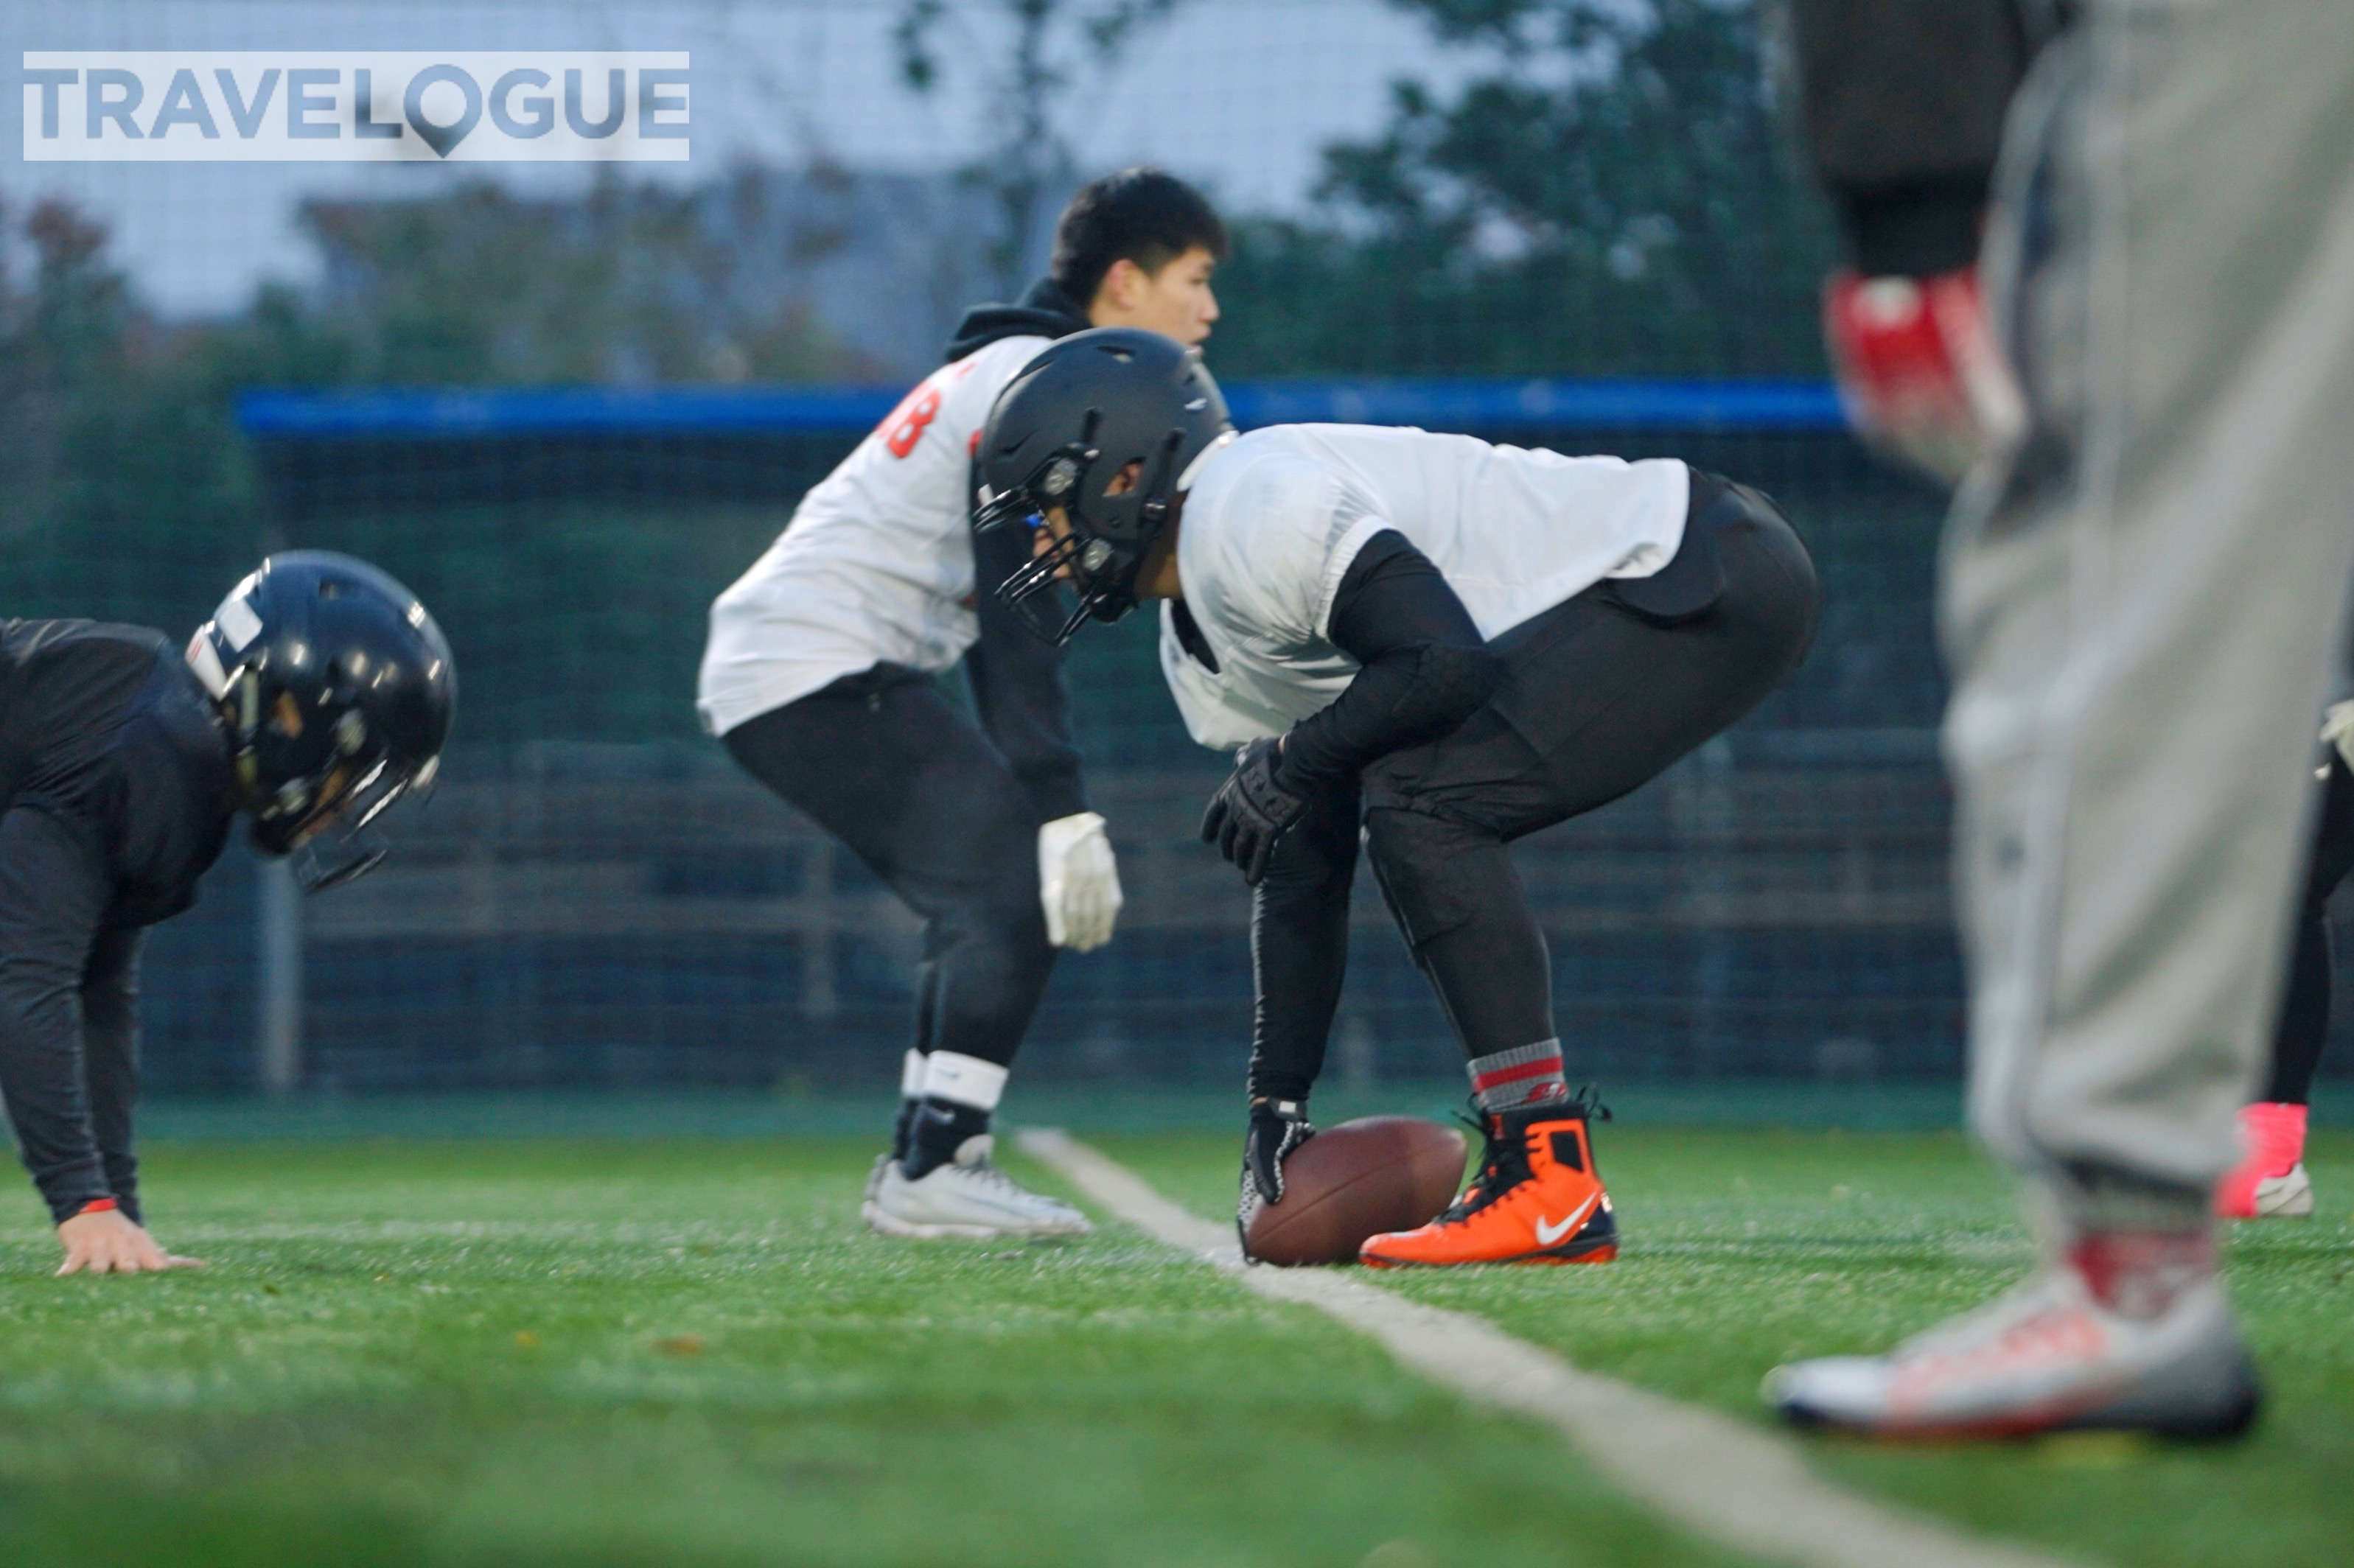 Peter Joseph Kuhn is an American NCAA football player and a big sports fan. In Changsha, he plays quarterback for the team named Changsha Revolutionaries. At weekends, he and his friends regularly get together to play football in Shawan Park. /CGTN